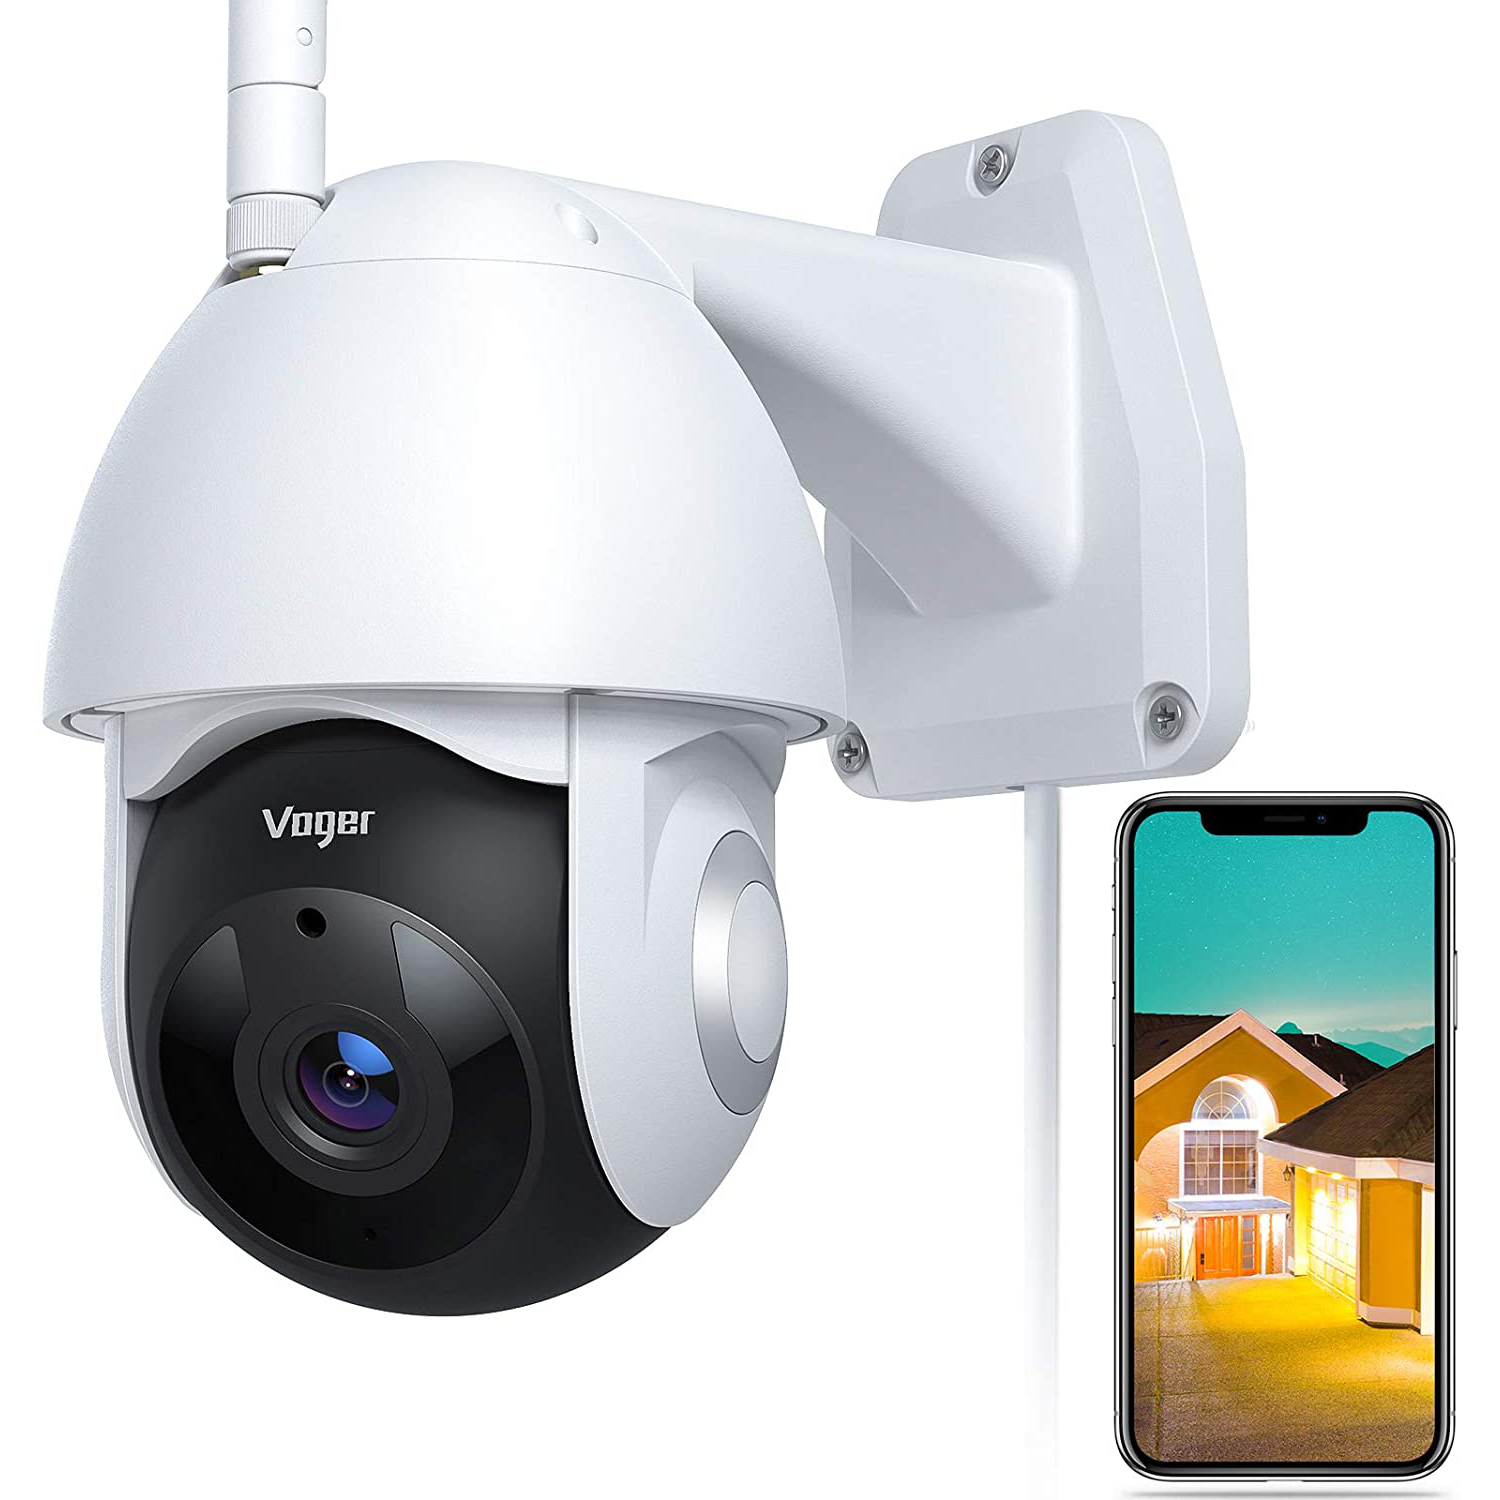 1080P Security Camera Outdoor | 360° View WiFi Home Security Camera System